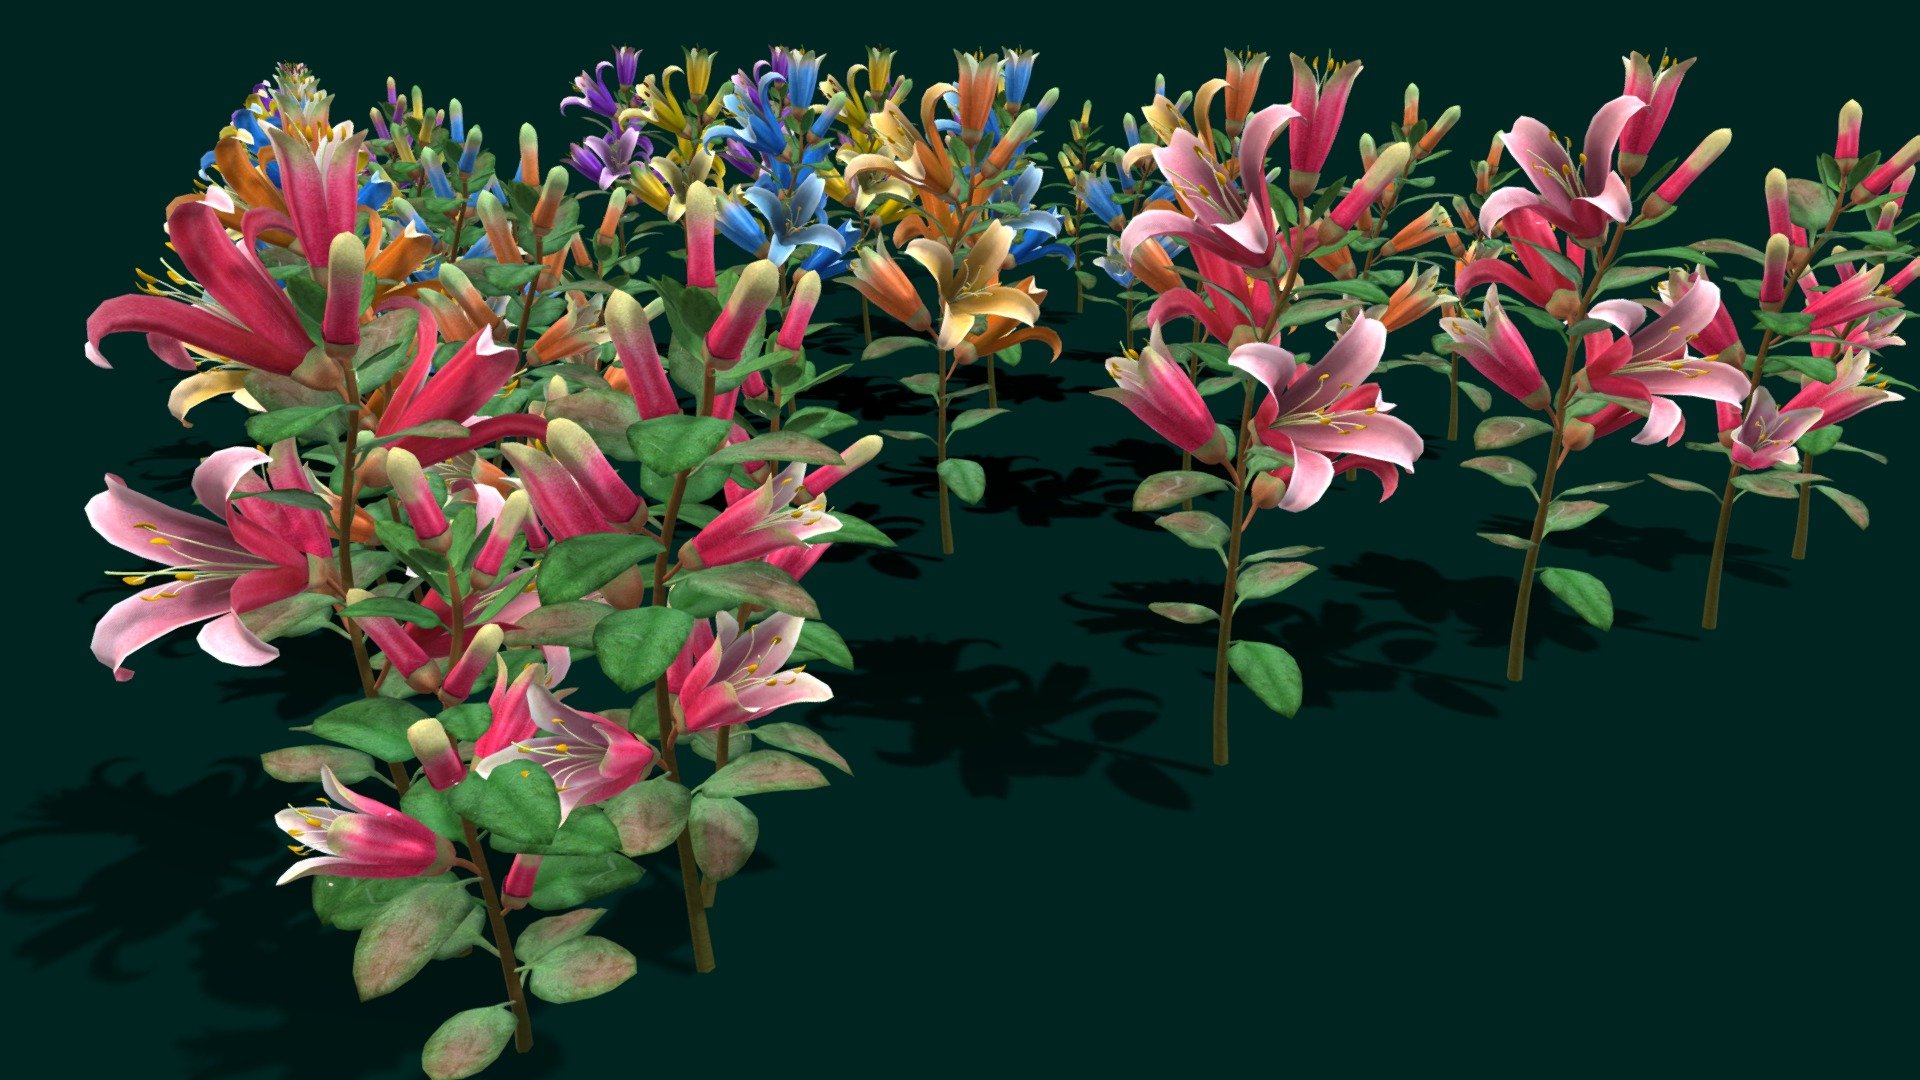 HIGH QUALITY Flower optimized for Unity game engine!
Mobile Optimize Scene
This is model 3D Flower Correa Reflexa in the Big Pack (Cartoon Flower Colections) with over 5 types color!
All objects are ready to use in your visualizations.
- 1024x1024, texture maps
- Poly Count : Average 405435polys,760580 tris,394740 Verts - Flower Correa Reflexa - Buy Royalty Free 3D model by vustudios 3d model